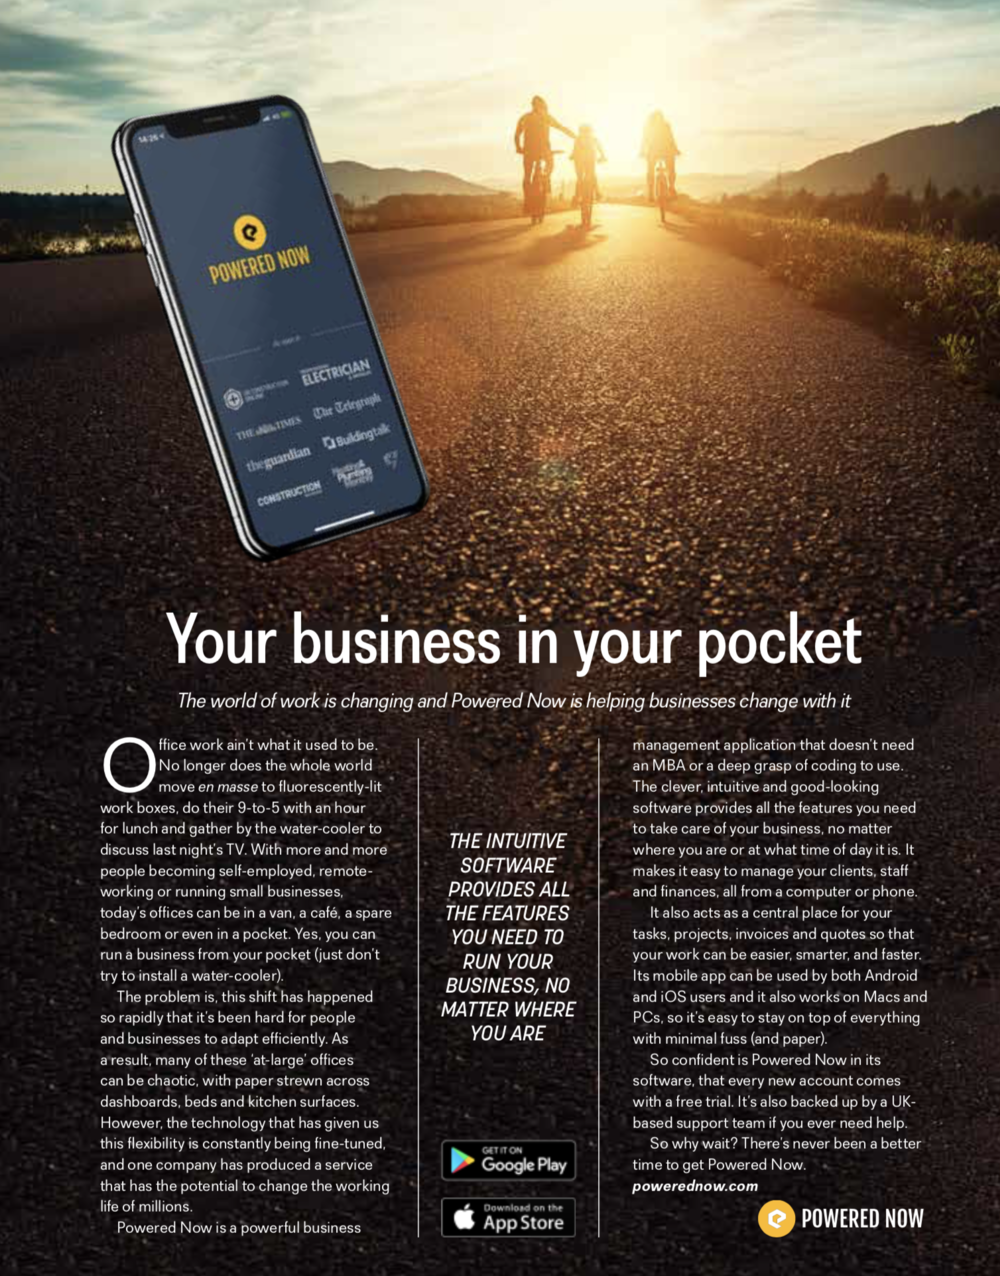 Your business in your pocket - The world of working is changing and Powered Now is helping businesses change with it